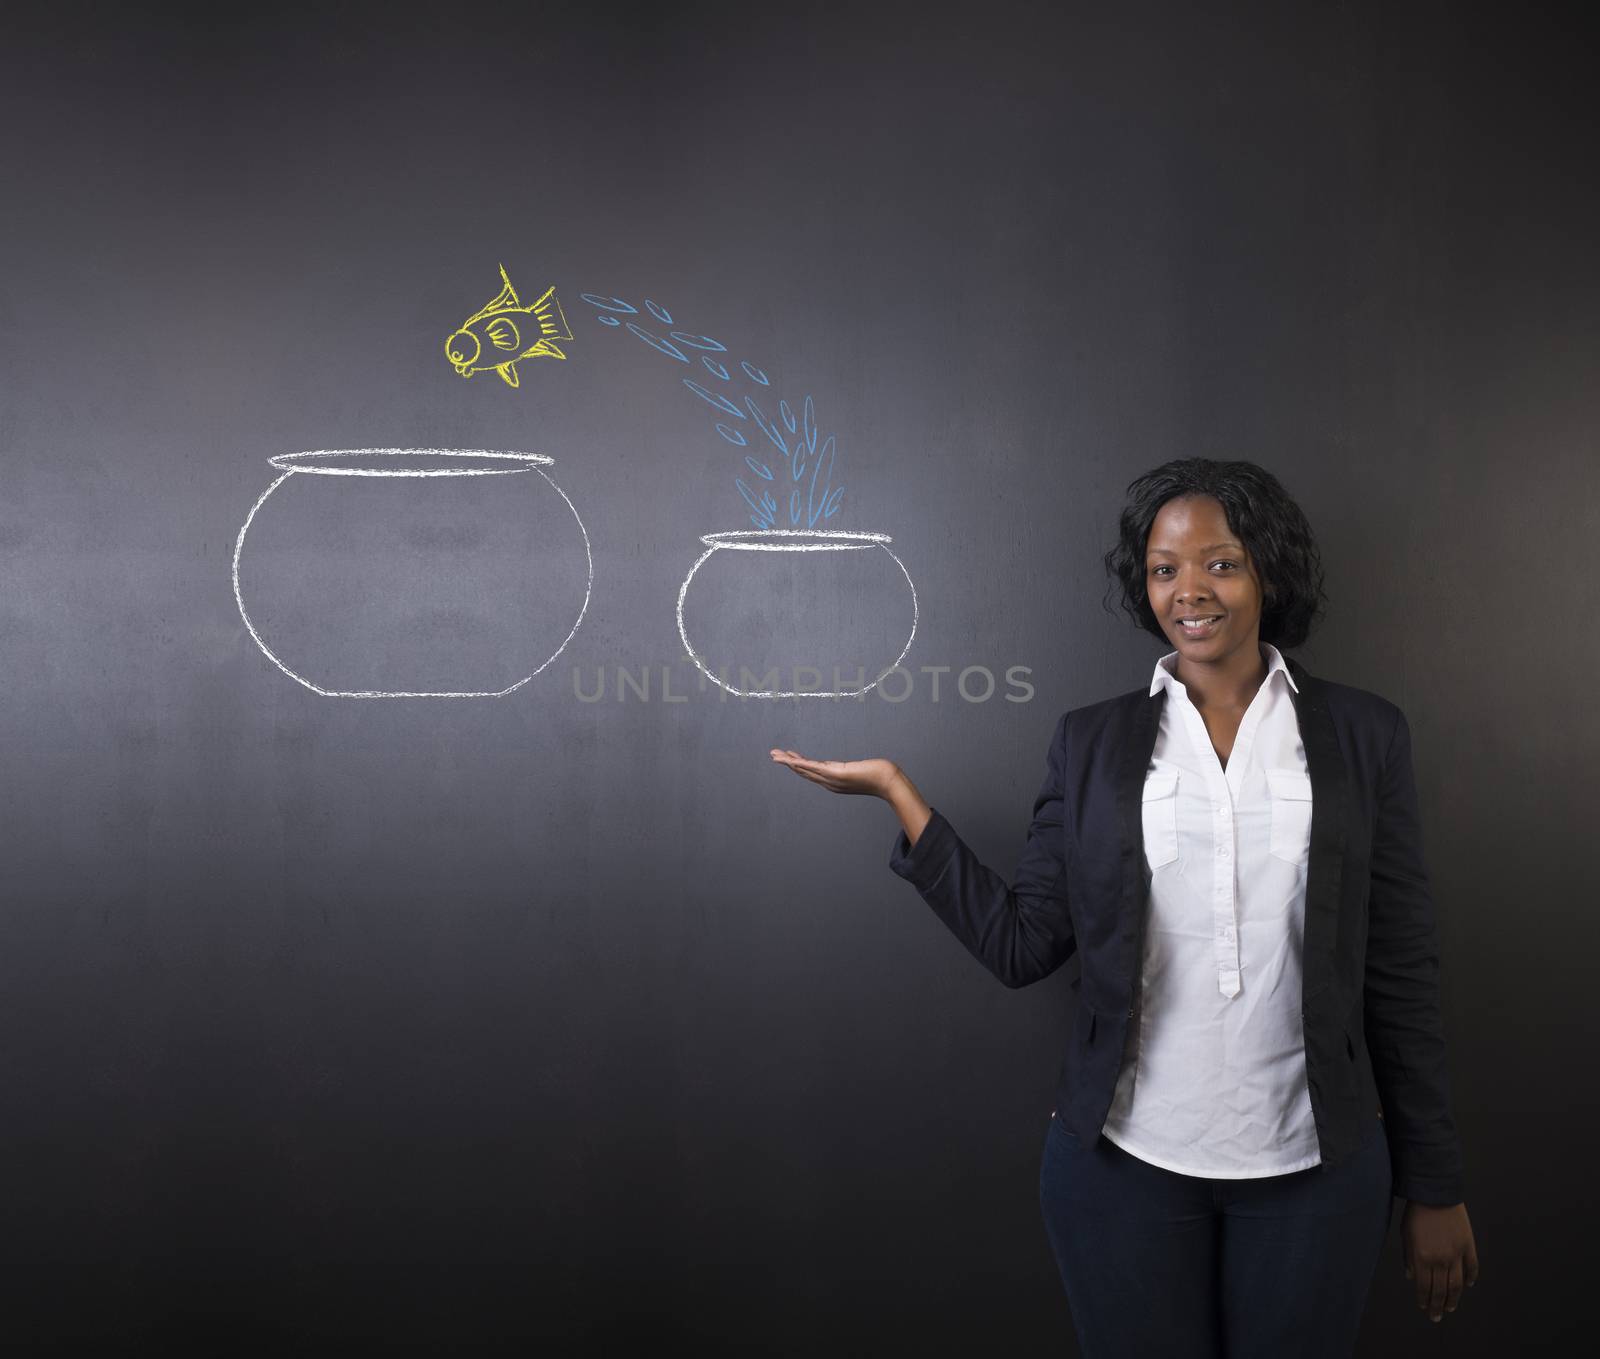 South African or African American woman teacher or student holding her hand up with a fish jumping from a small bowl to a big bowl on a blackboard background